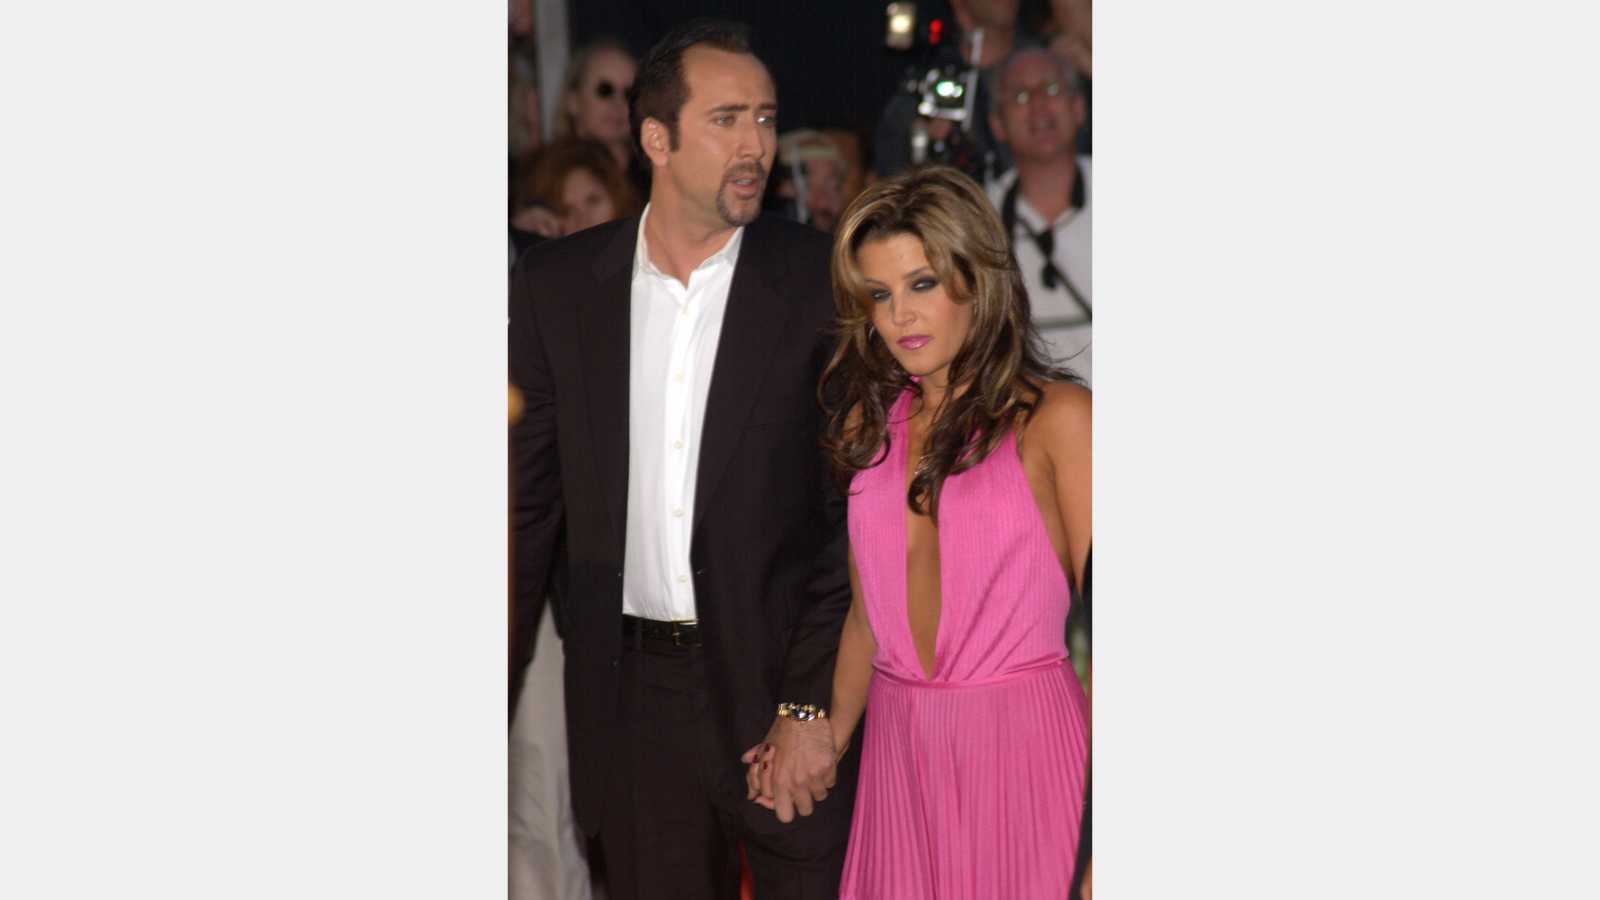 Actor NICOLAS CAGE & girlfriend LISA MARIE PRESLEY at the Los Angeles premiere of his new movie Captain Corelli's Mandolin. 13AUG2001. Paul Smith/Featureflash